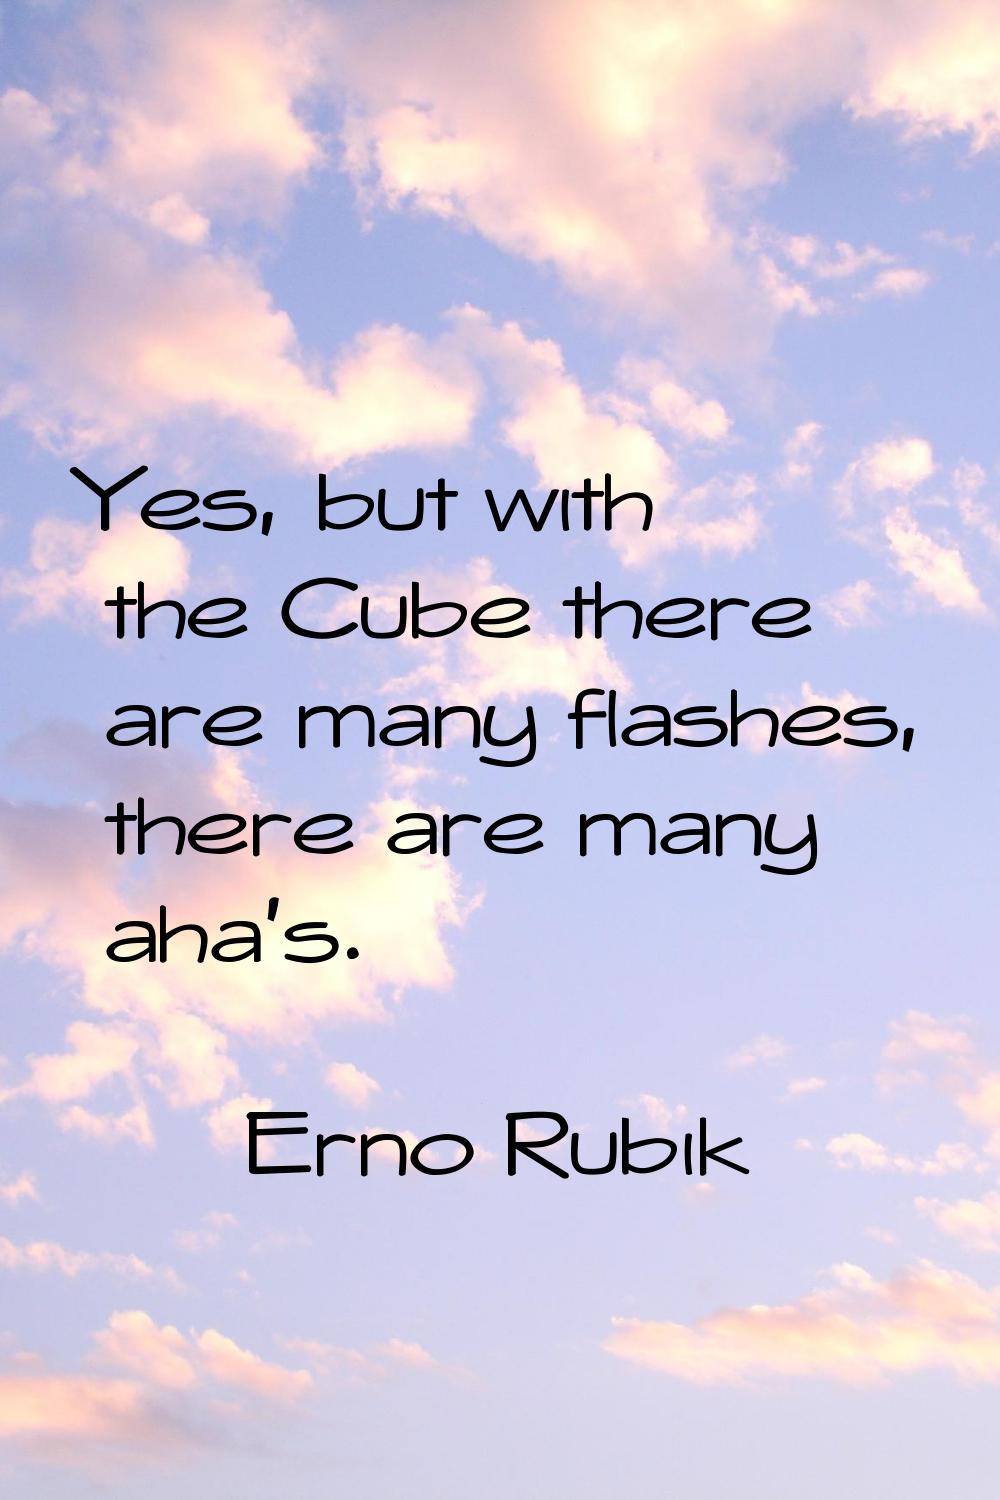 Yes, but with the Cube there are many flashes, there are many aha's.